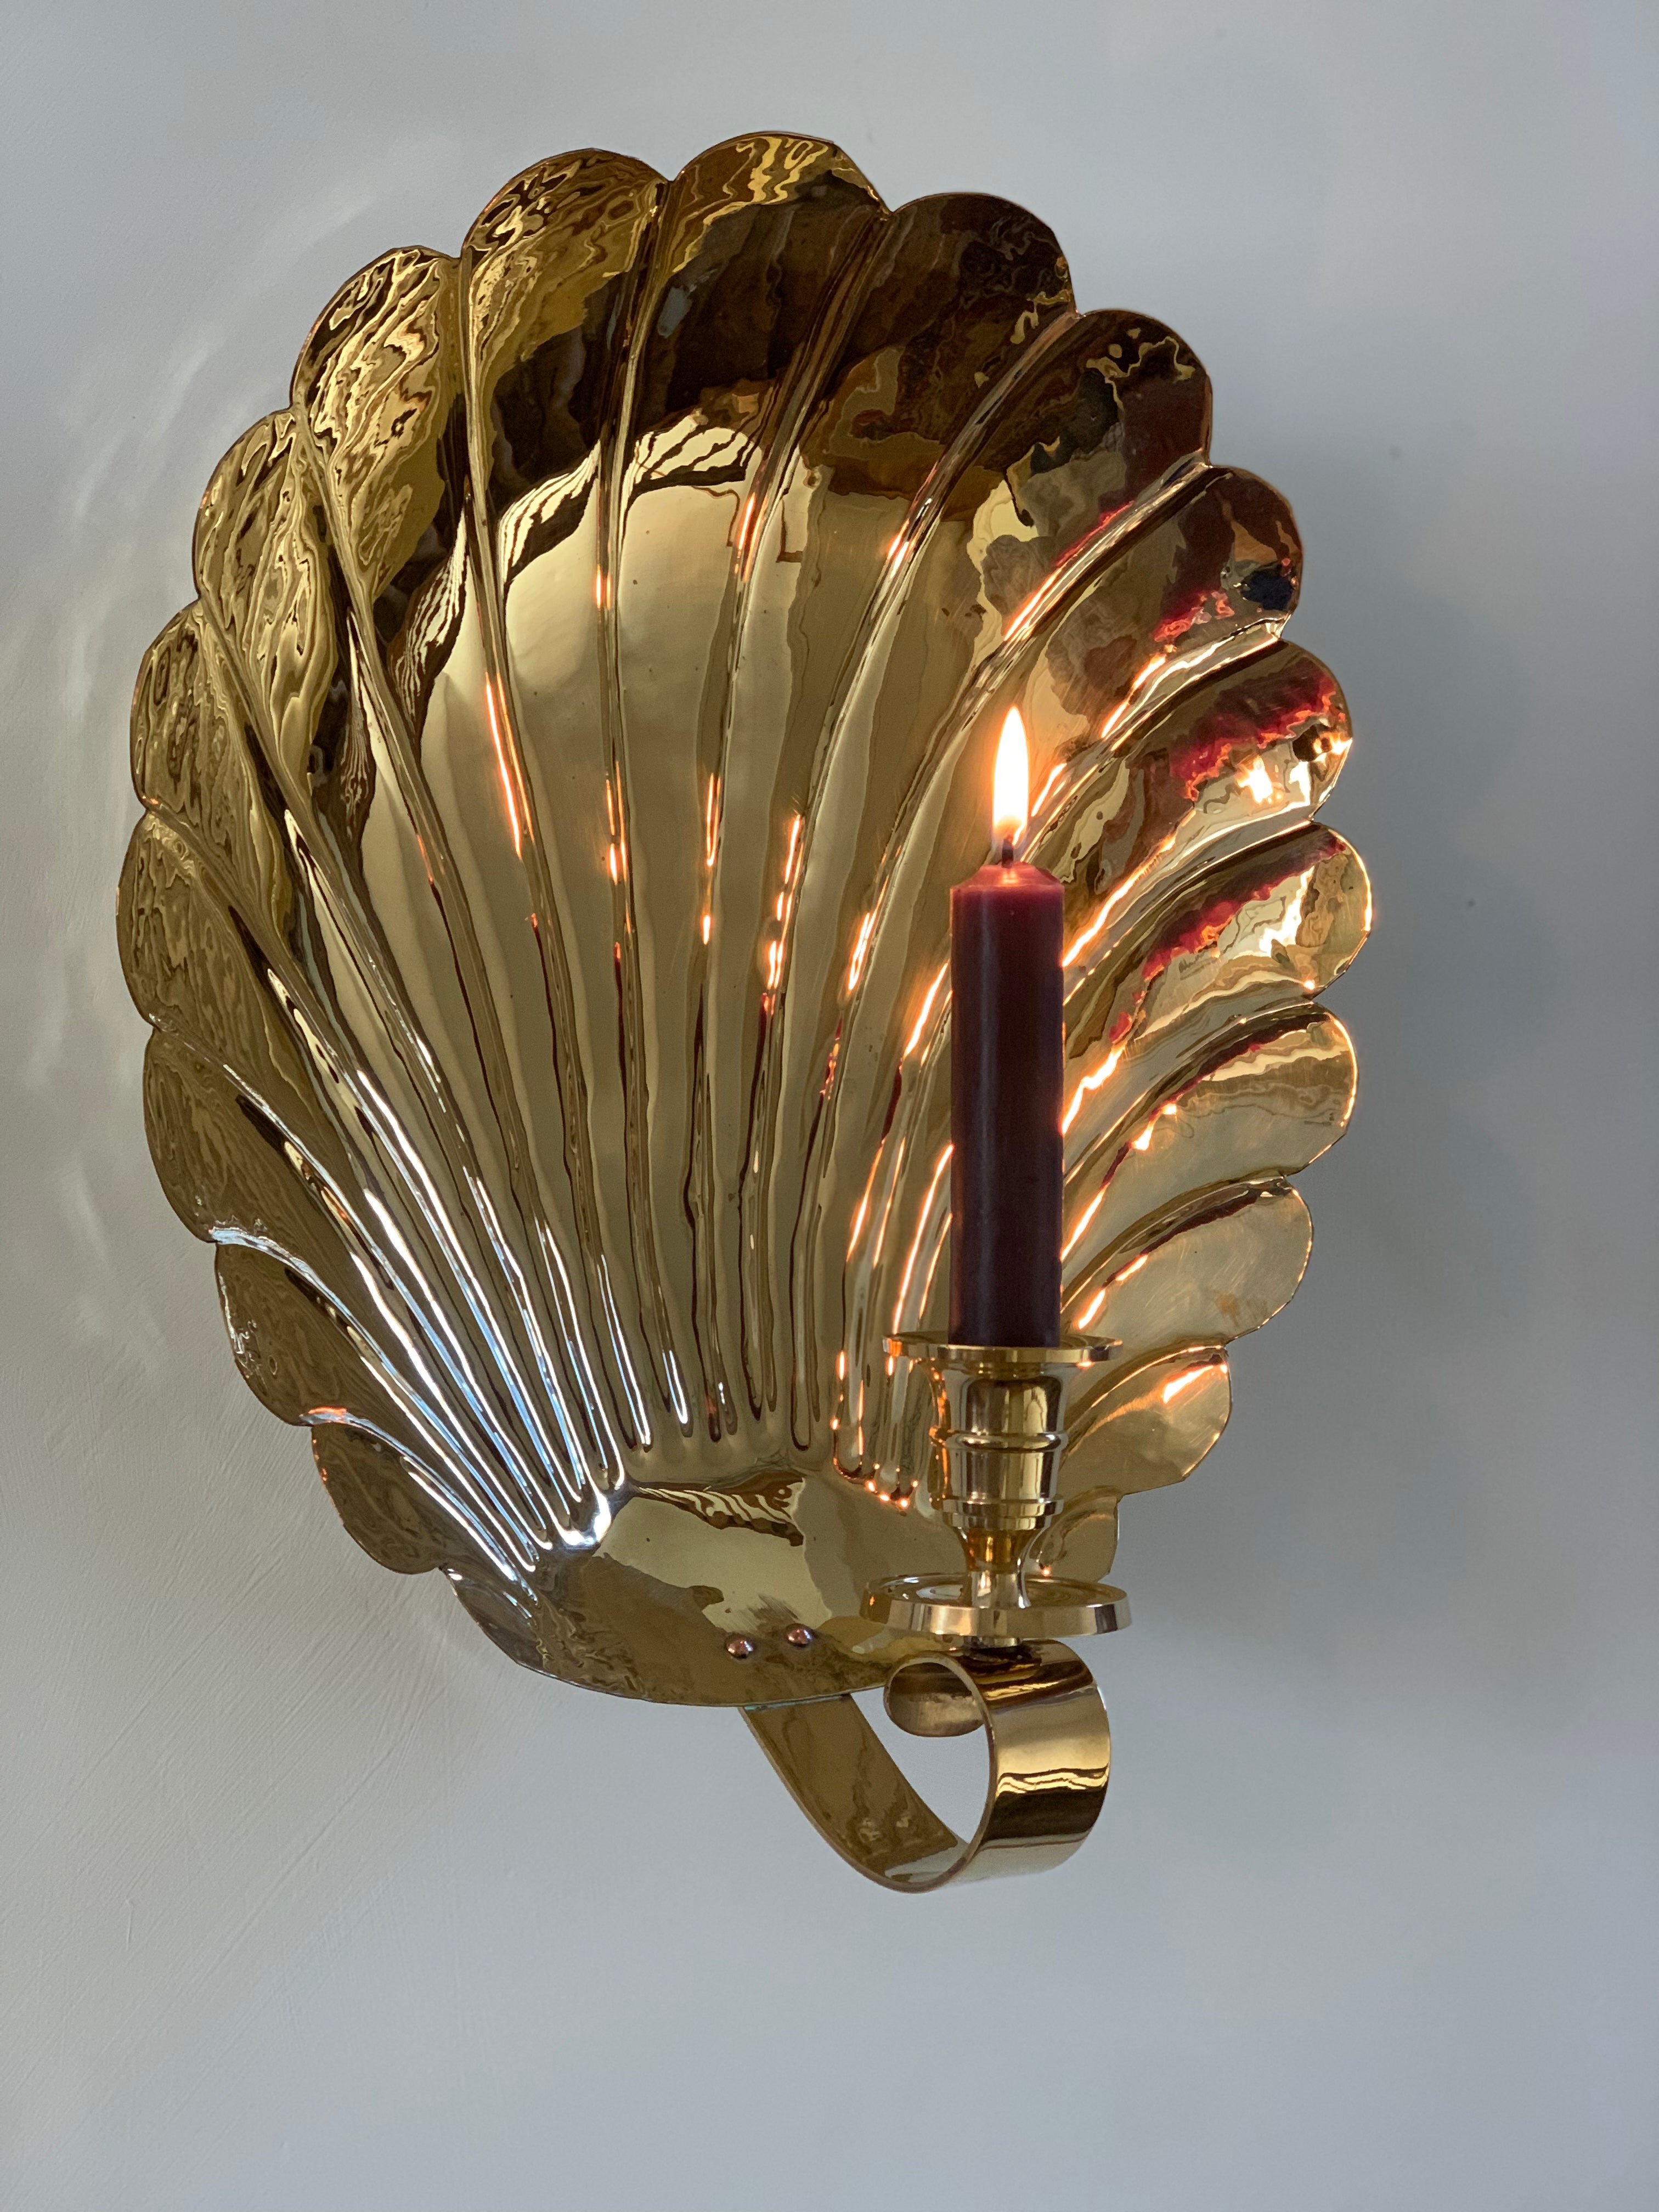 Large Scallop Candle Sconce, Polished Brass. 36 cm